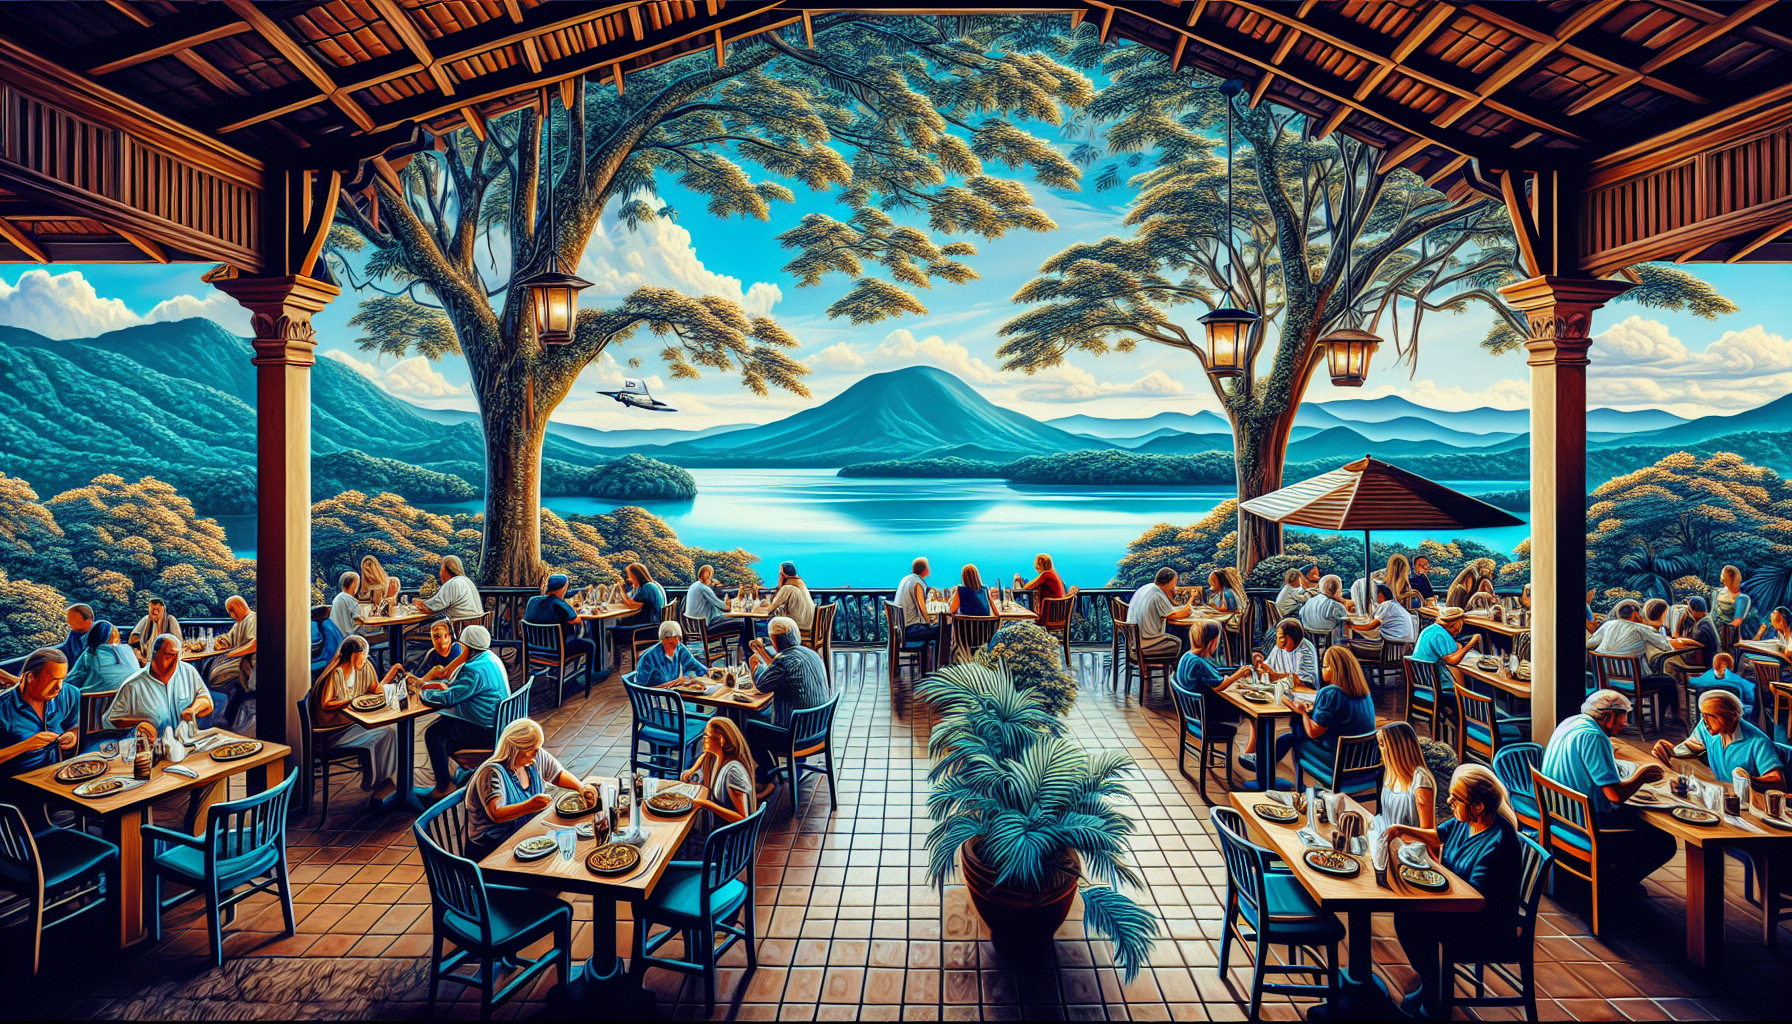 Where Can I Find Nicaraguan Restaurants With Outdoor Seating And Scenic Views?